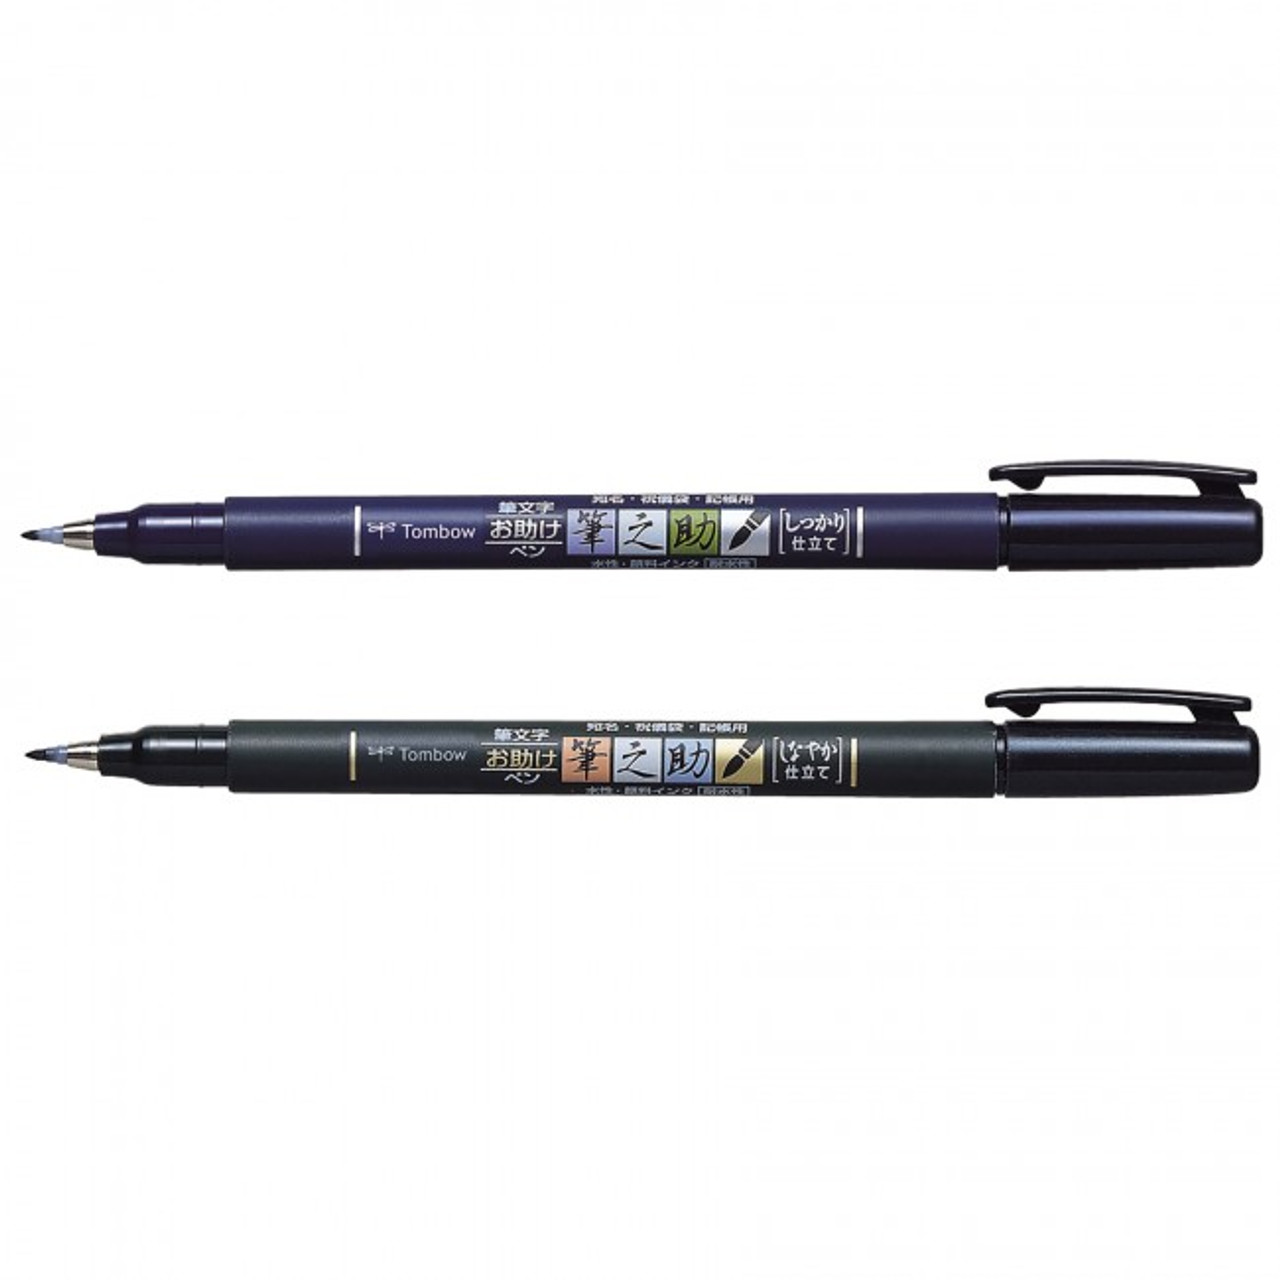 Tombow Fudenosuke Brush Pen 2 Pack - Hard and Soft - Wet Paint Artists'  Materials and Framing